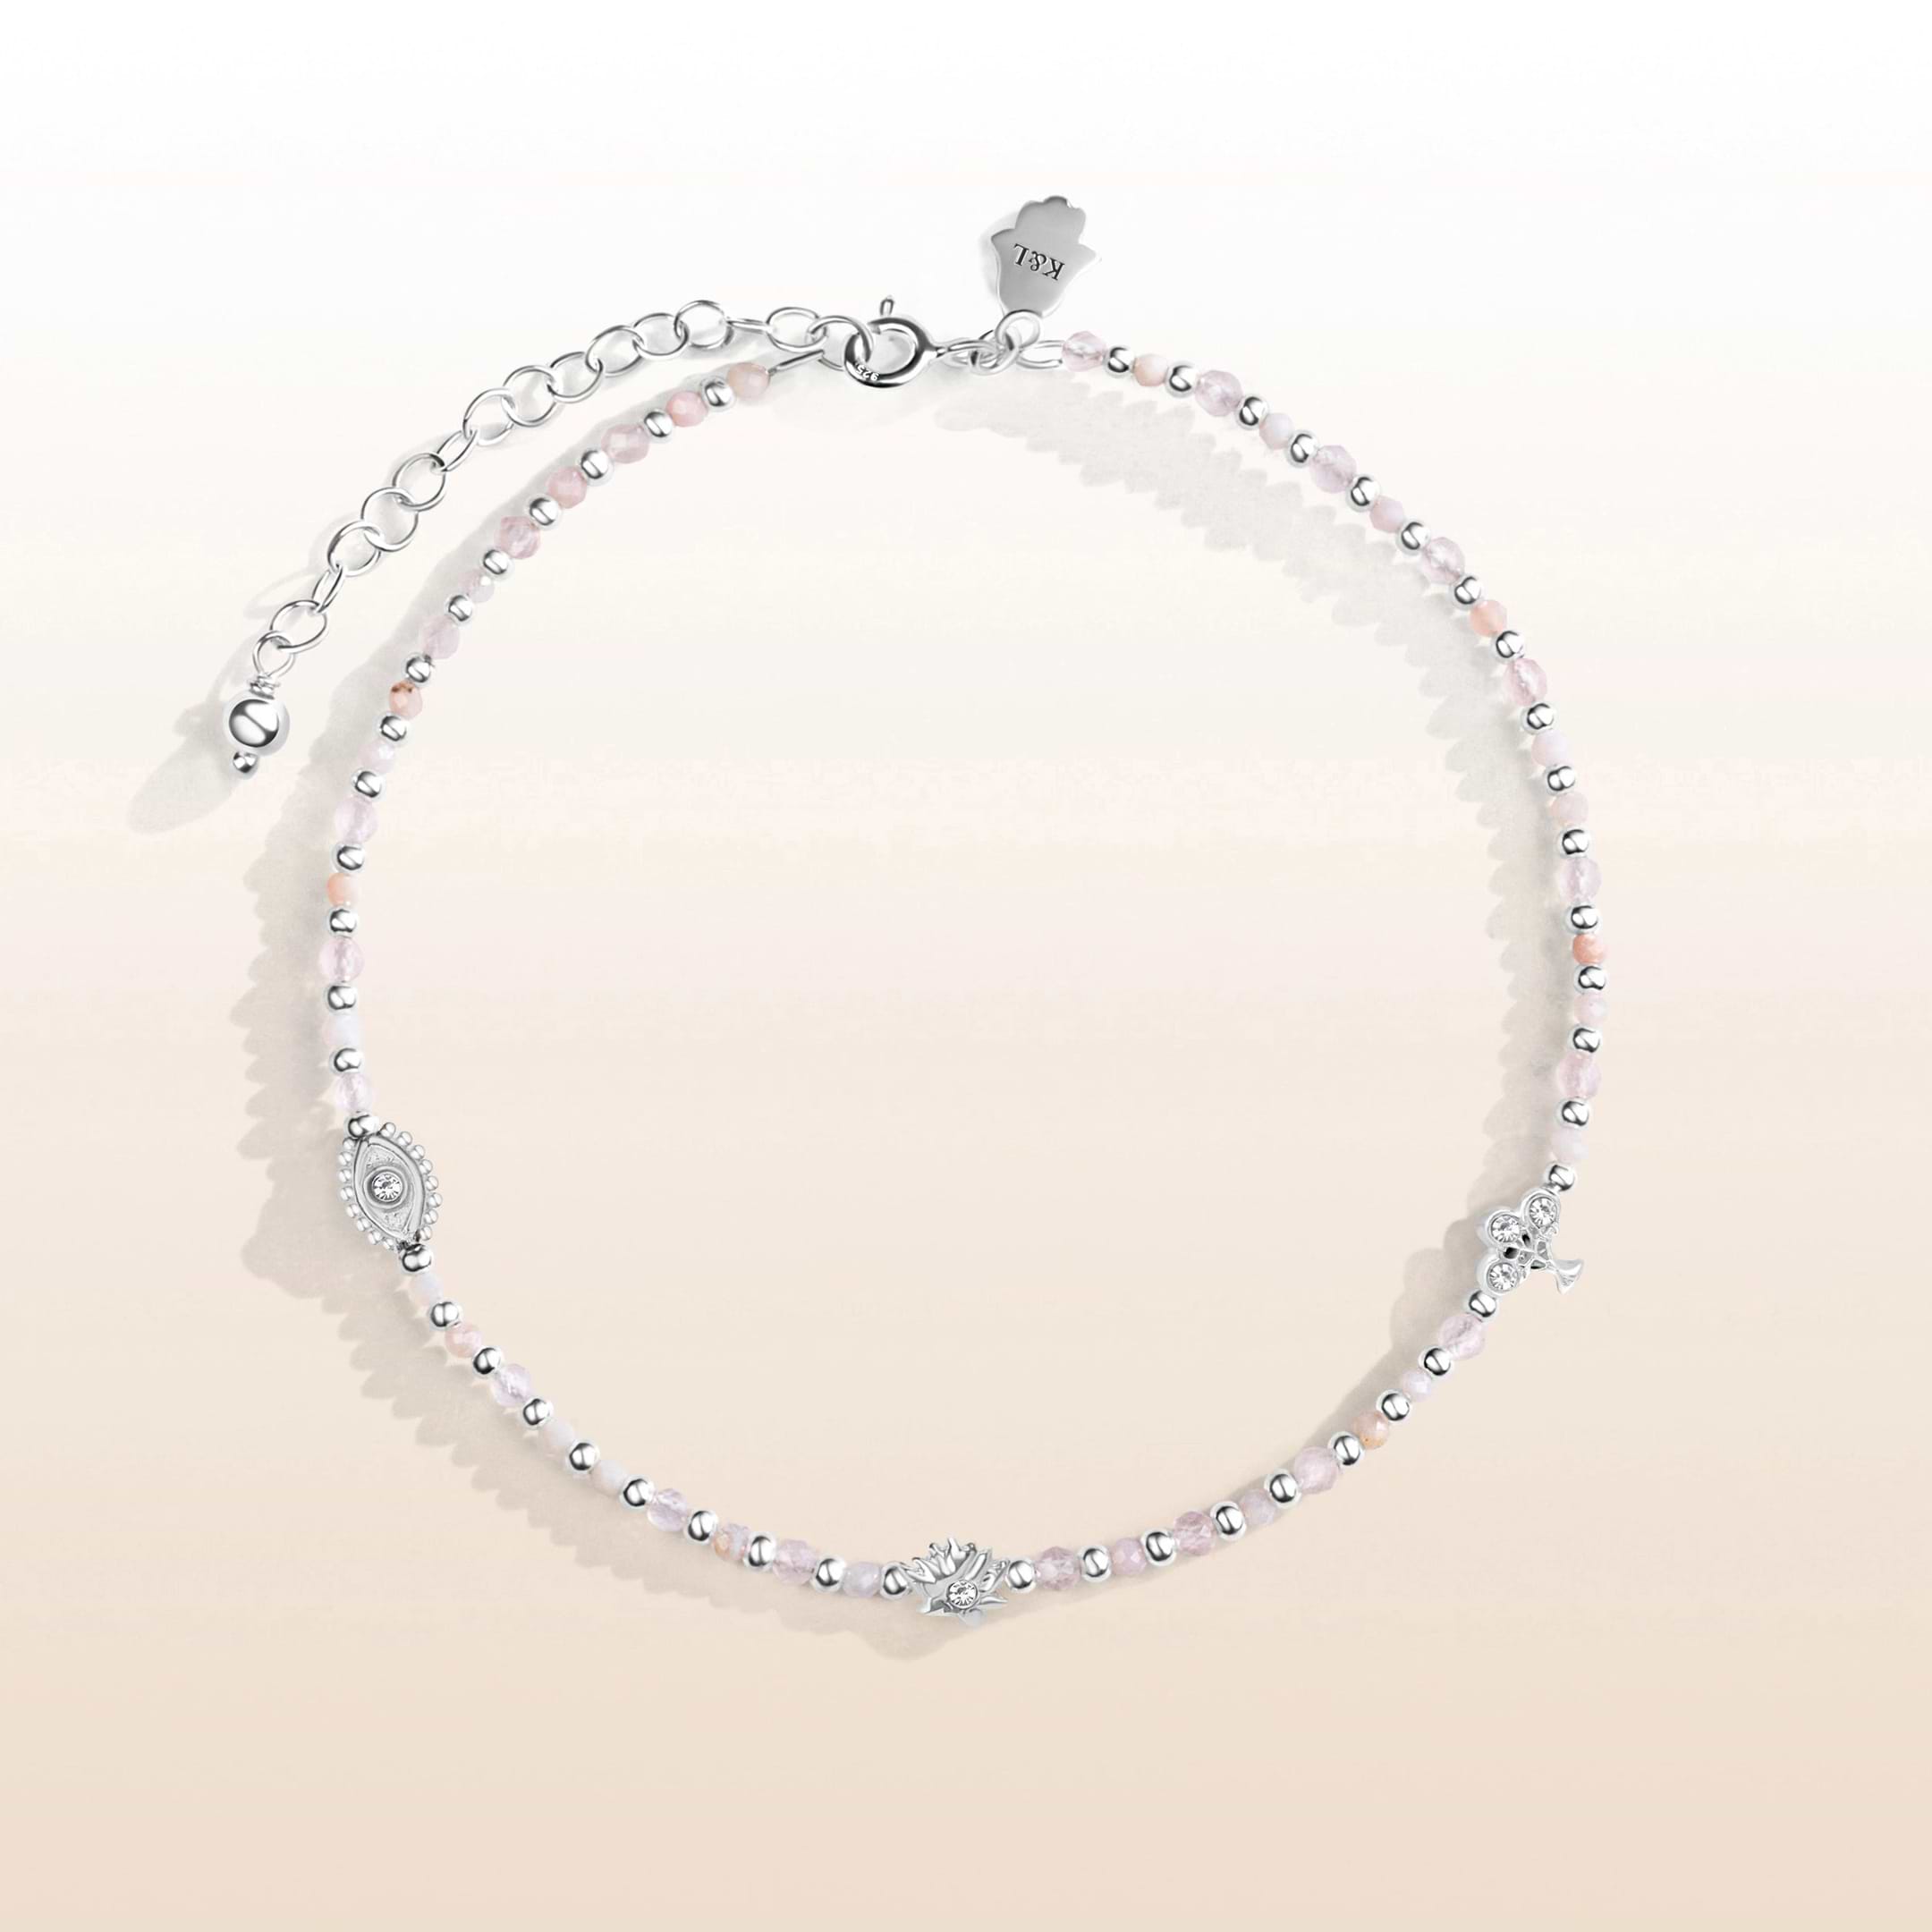 Surrounded by Love - Rose Quartz Silver Anklet